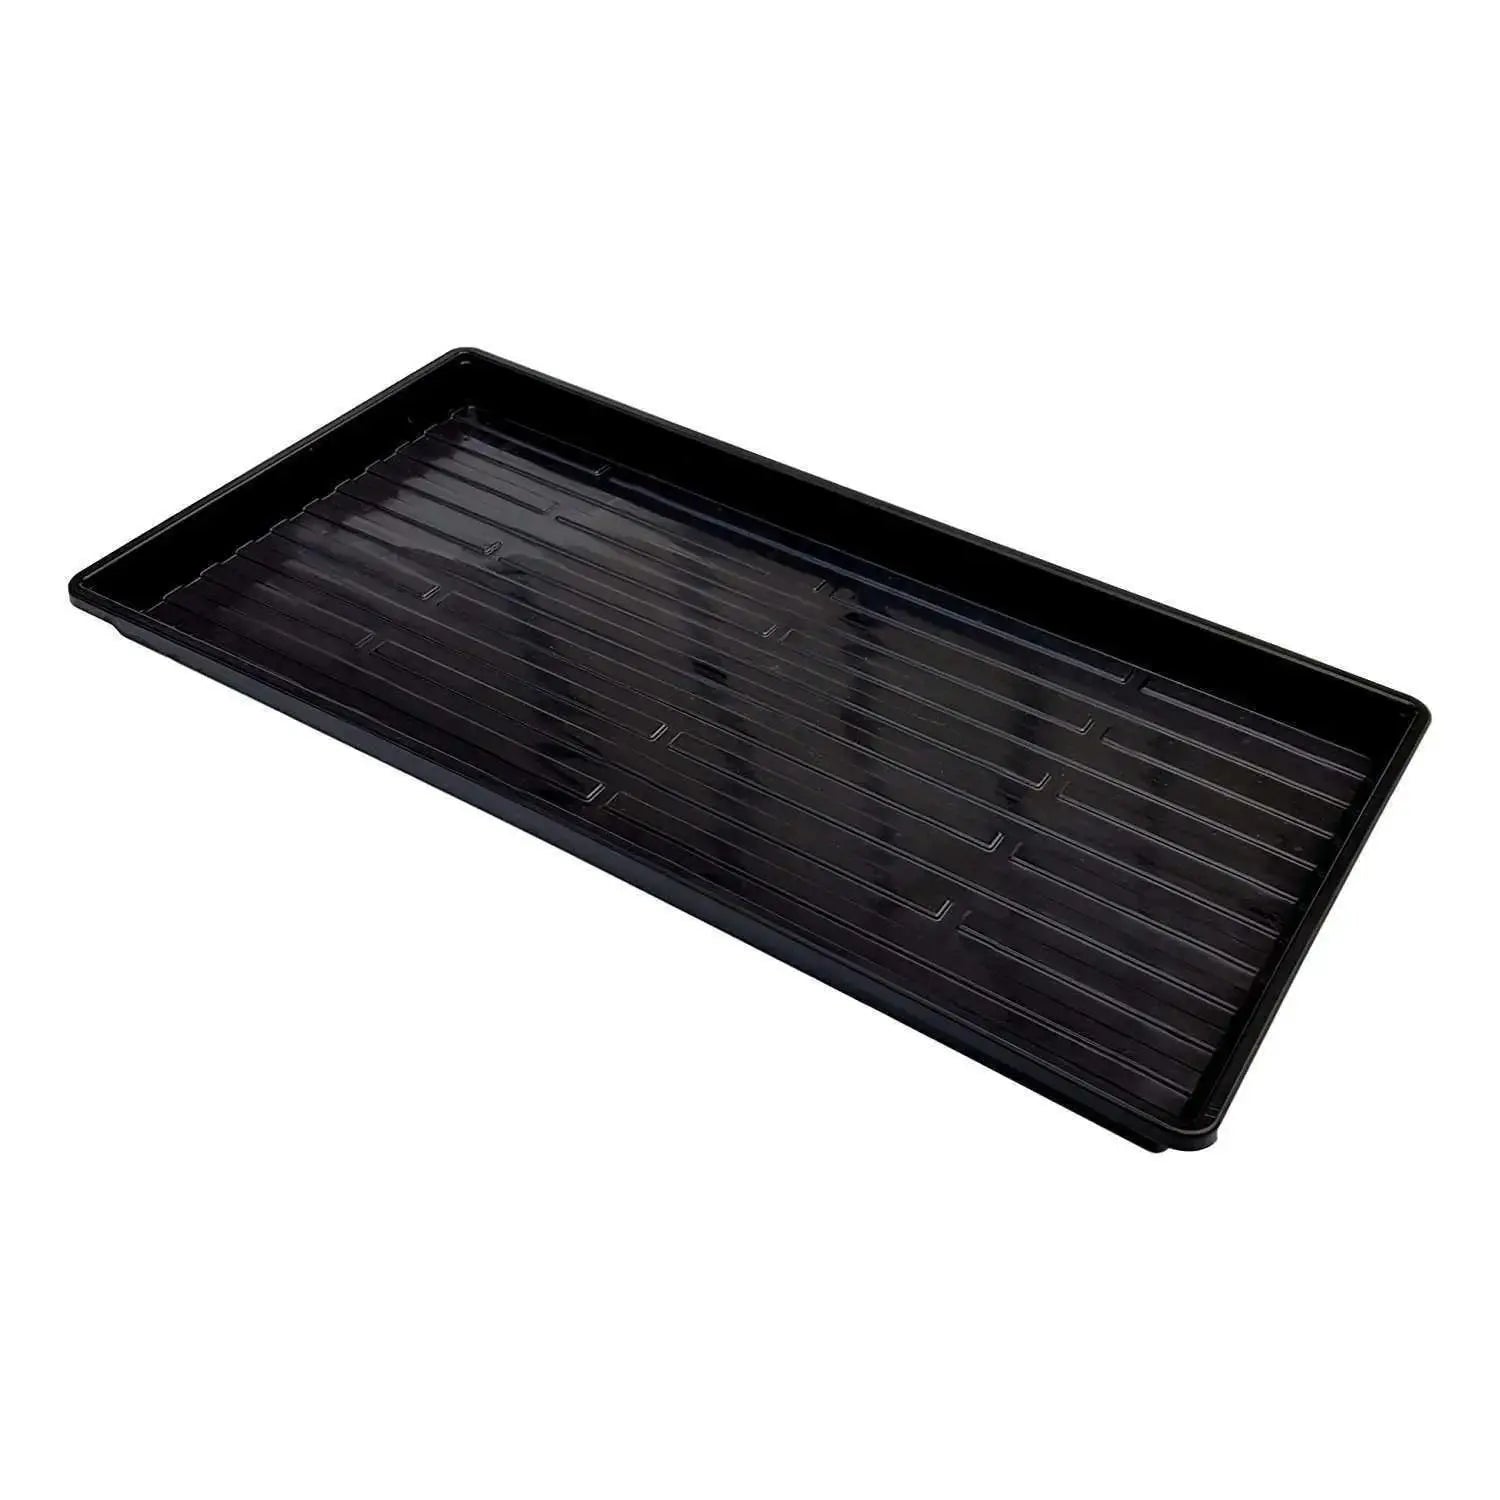 Microgreen Trays  Shop Shallow Trays for Microgreens - Bootstrap